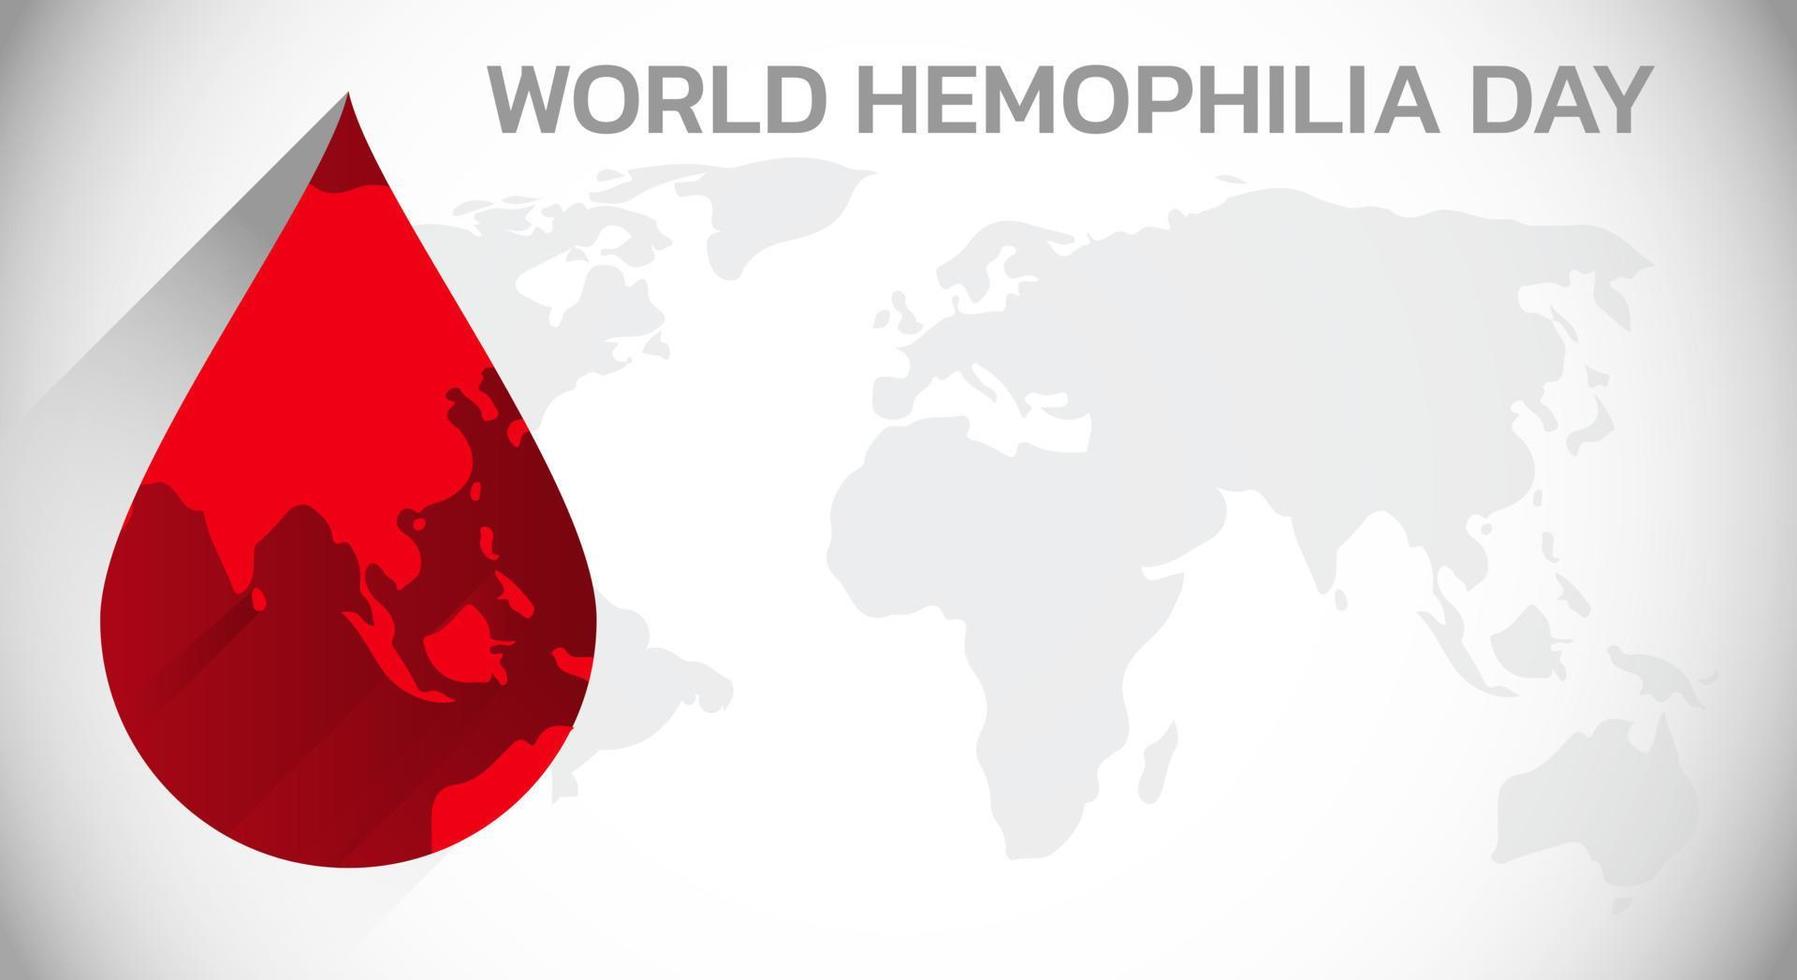 World Hemophilia day is observed every year on April 17, vector